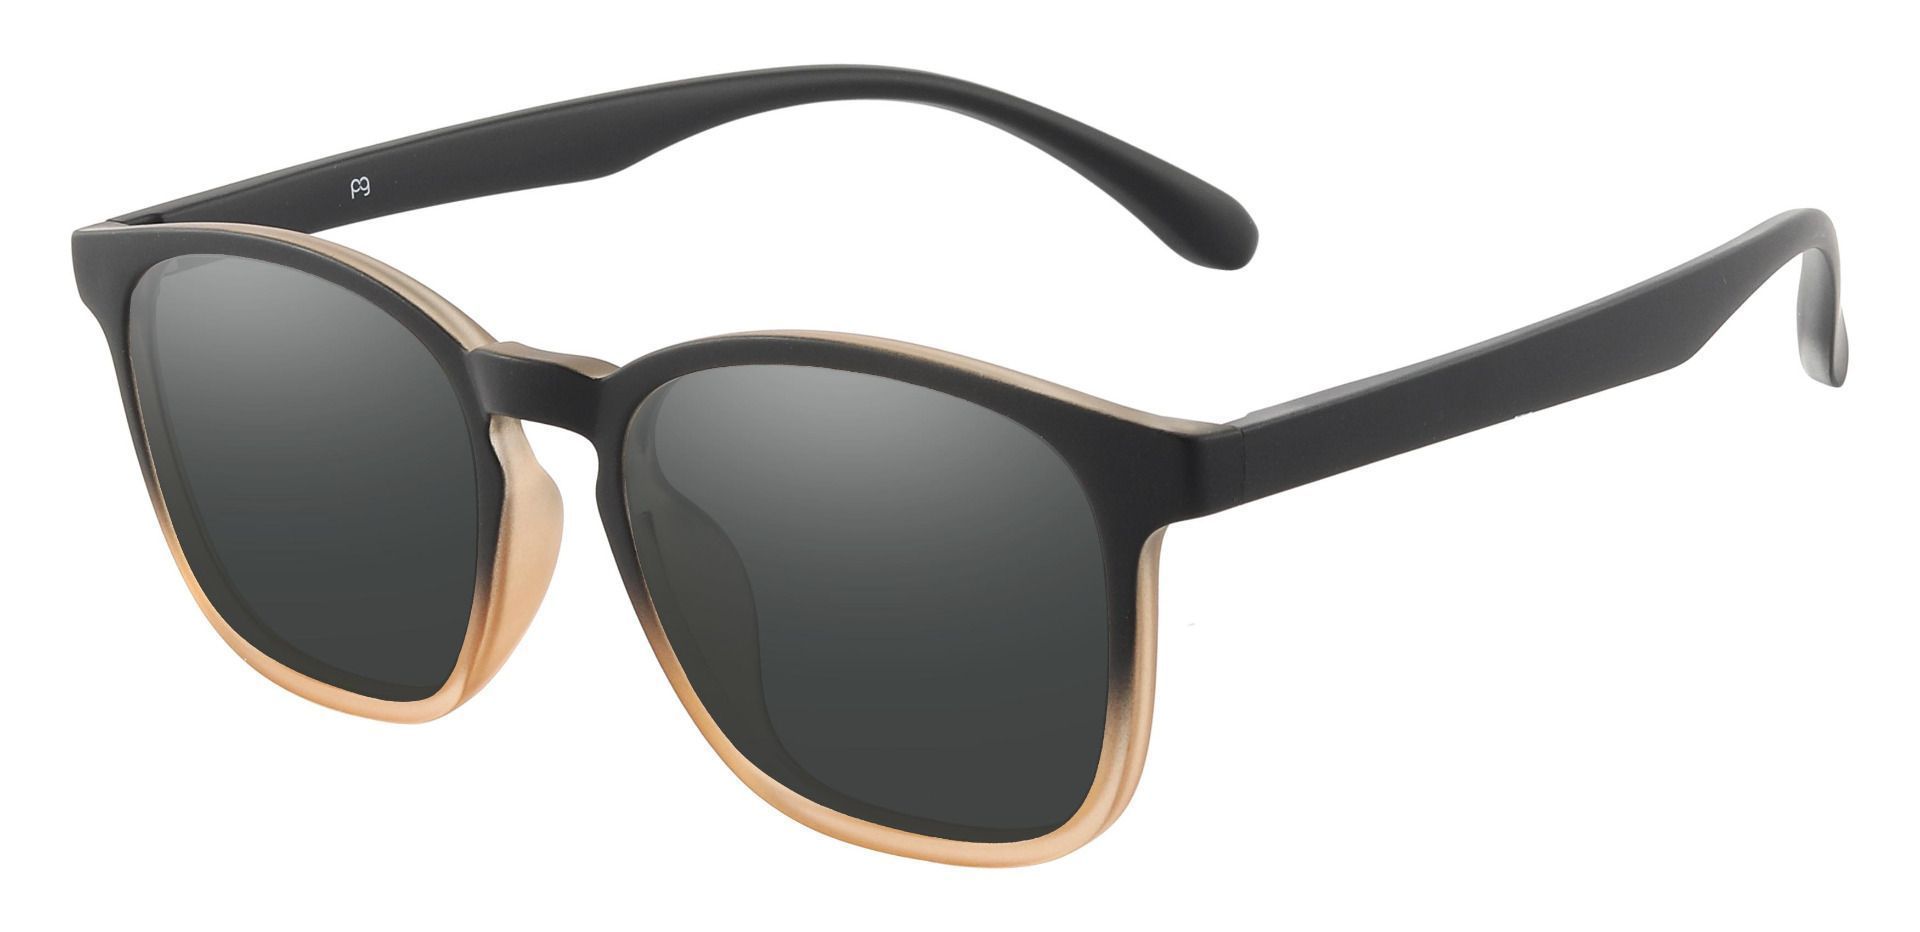 Gateway Square Reading Sunglasses - Brown Frame With Gray Lenses